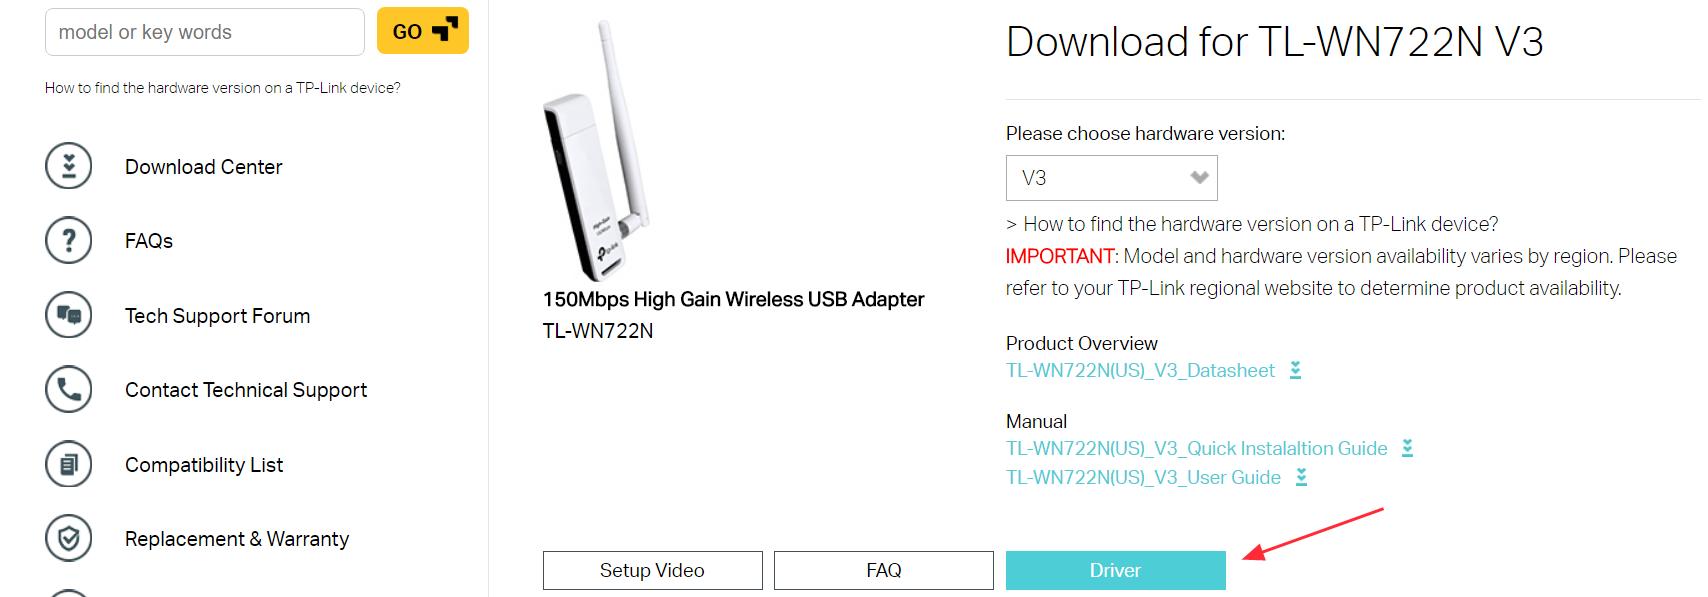 Archer T2uh Ac600 High Gain Wireless Dual Band Usb Adapter Tp Link